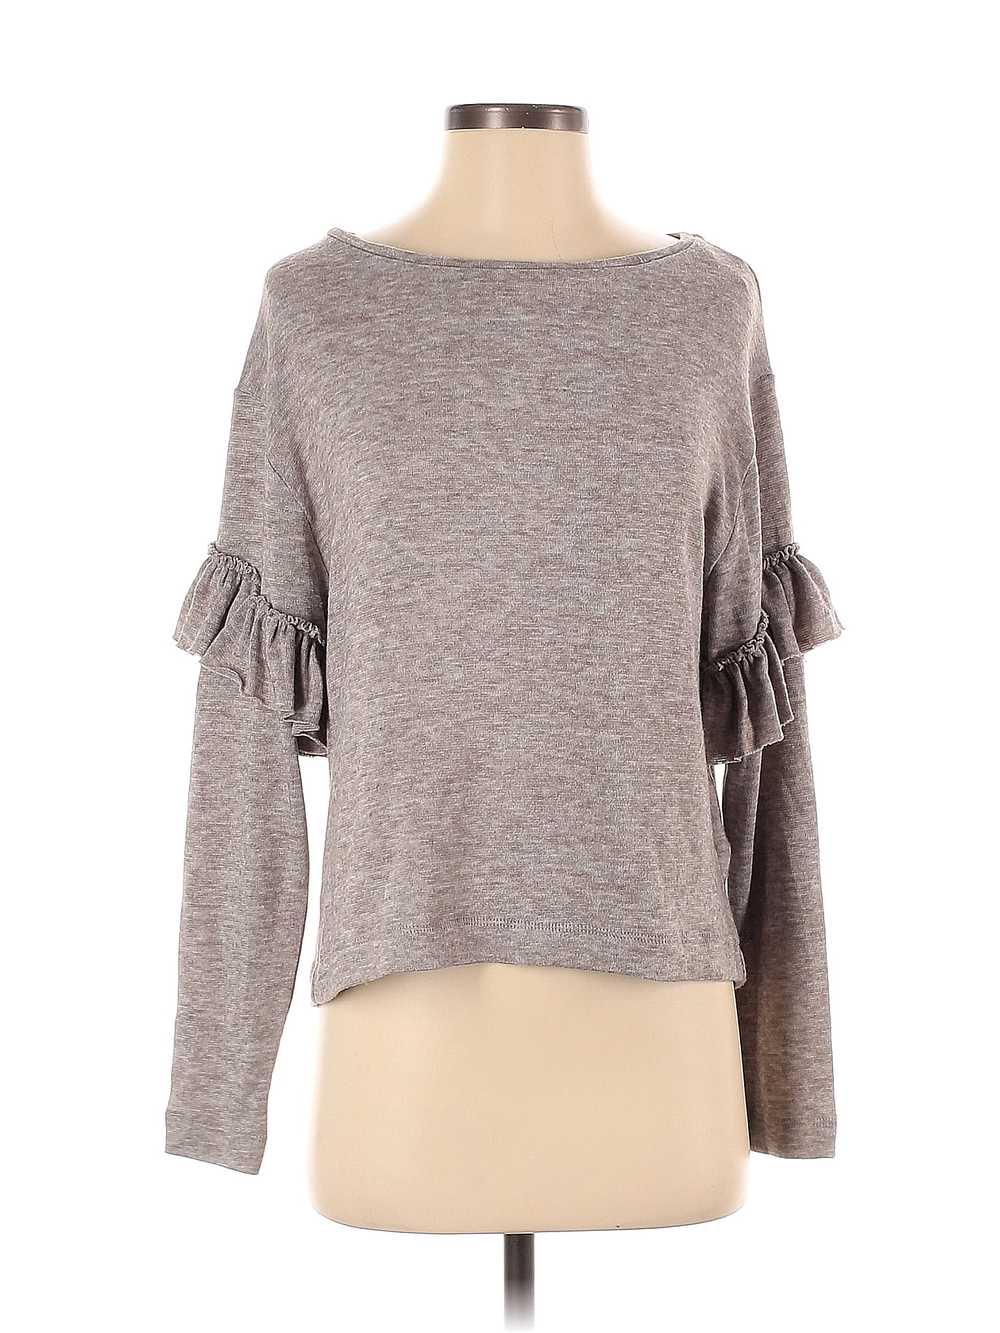 Zara W&B Collection Women Gray Pullover Sweater S - image 1